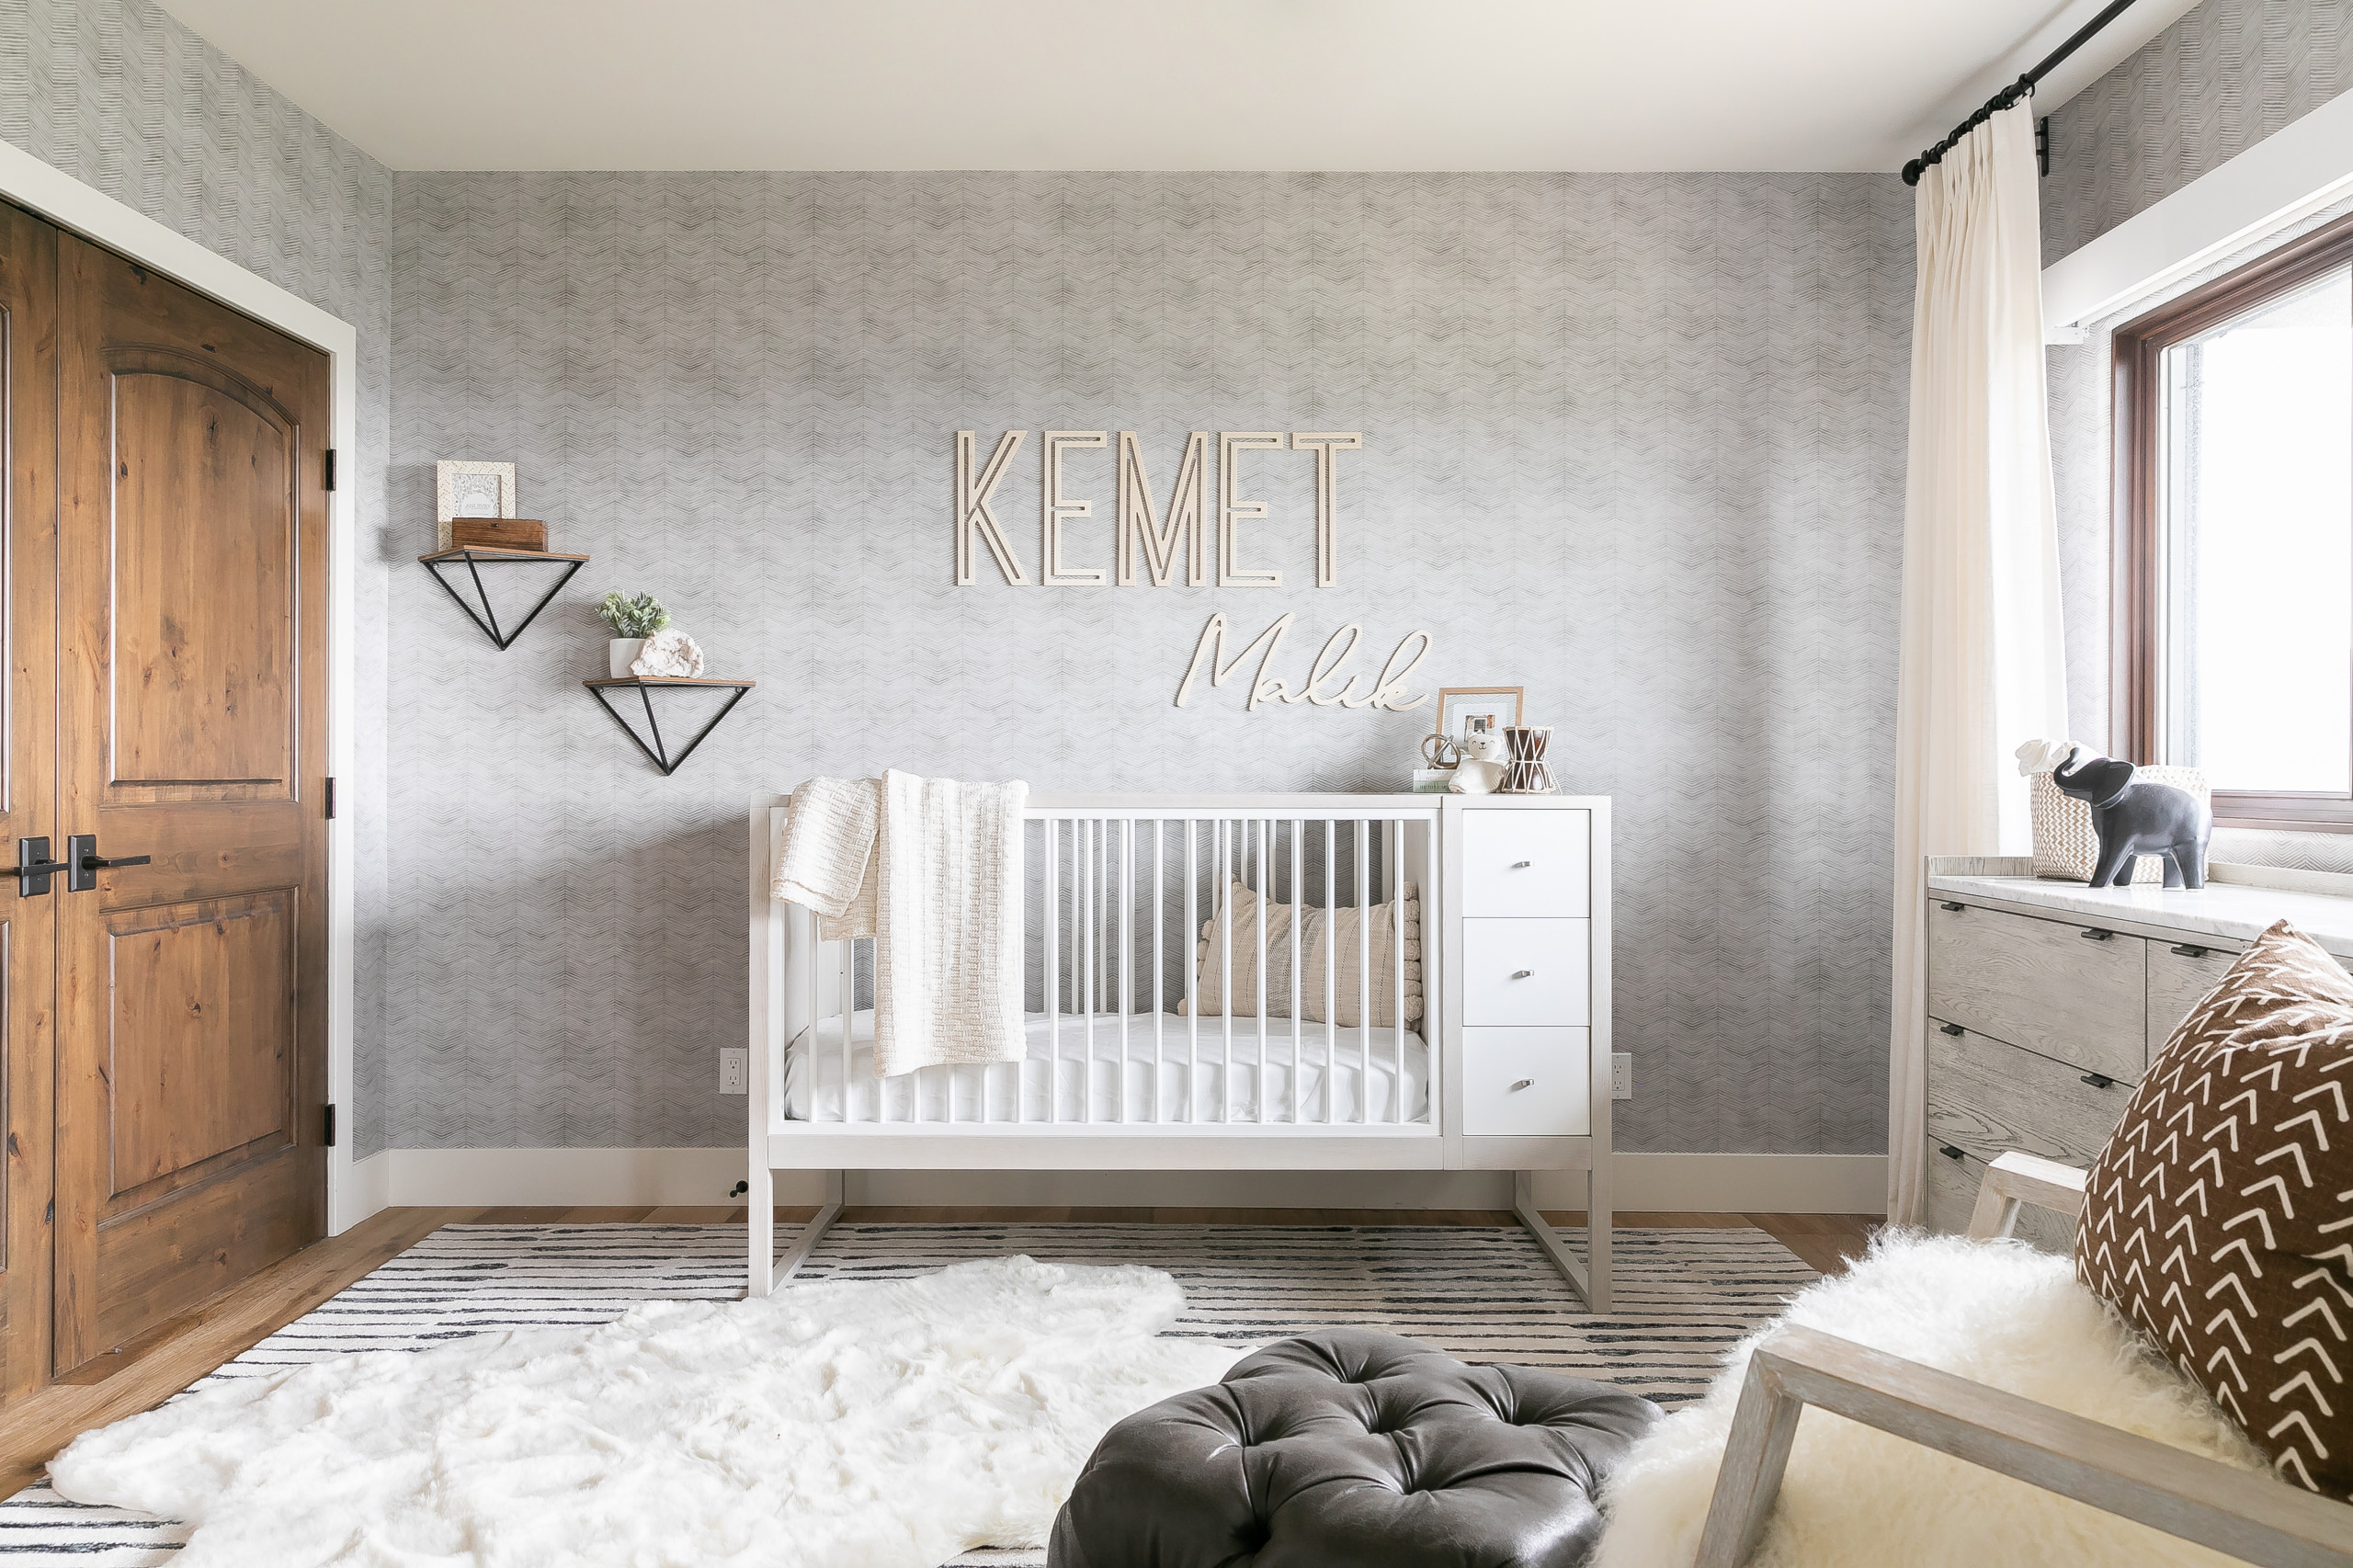 18 Transitional Nursery Interior Design Ideas for the Stylish and Practical Parent